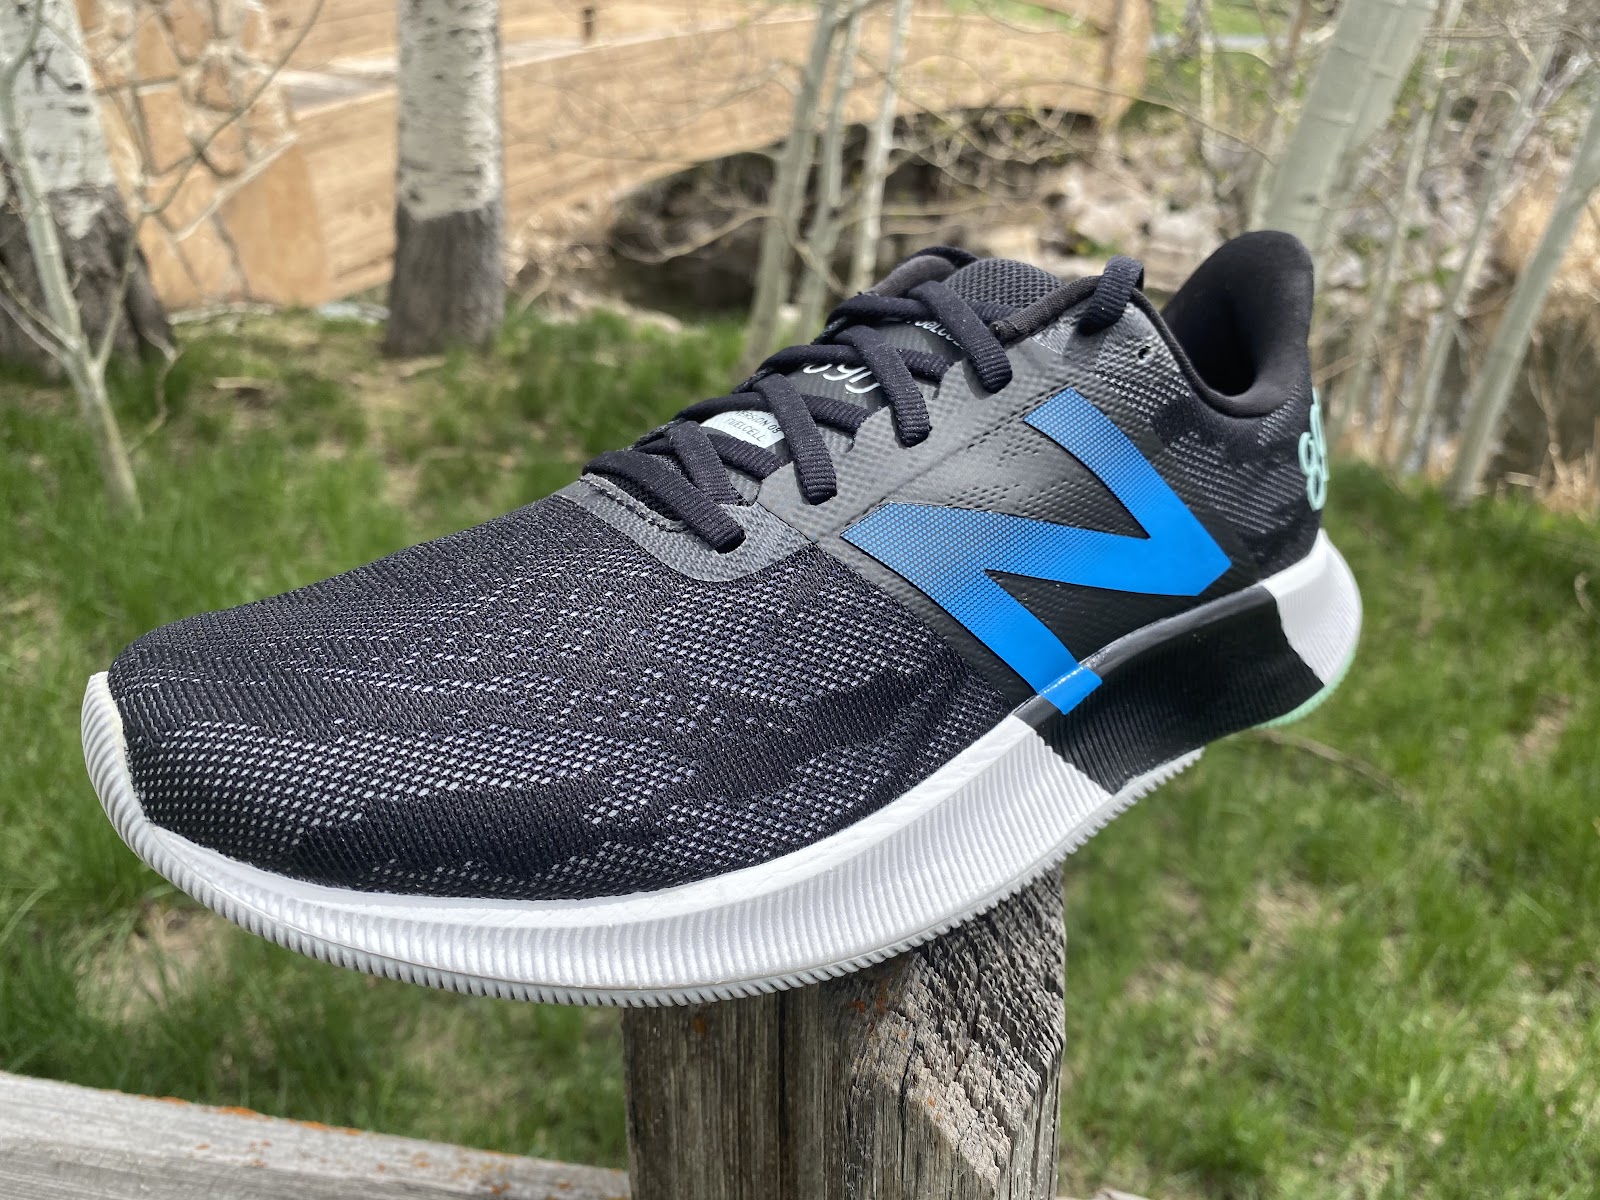 Road Trail Run: New Balance FuelCell 890 v8 Multi Tester Review